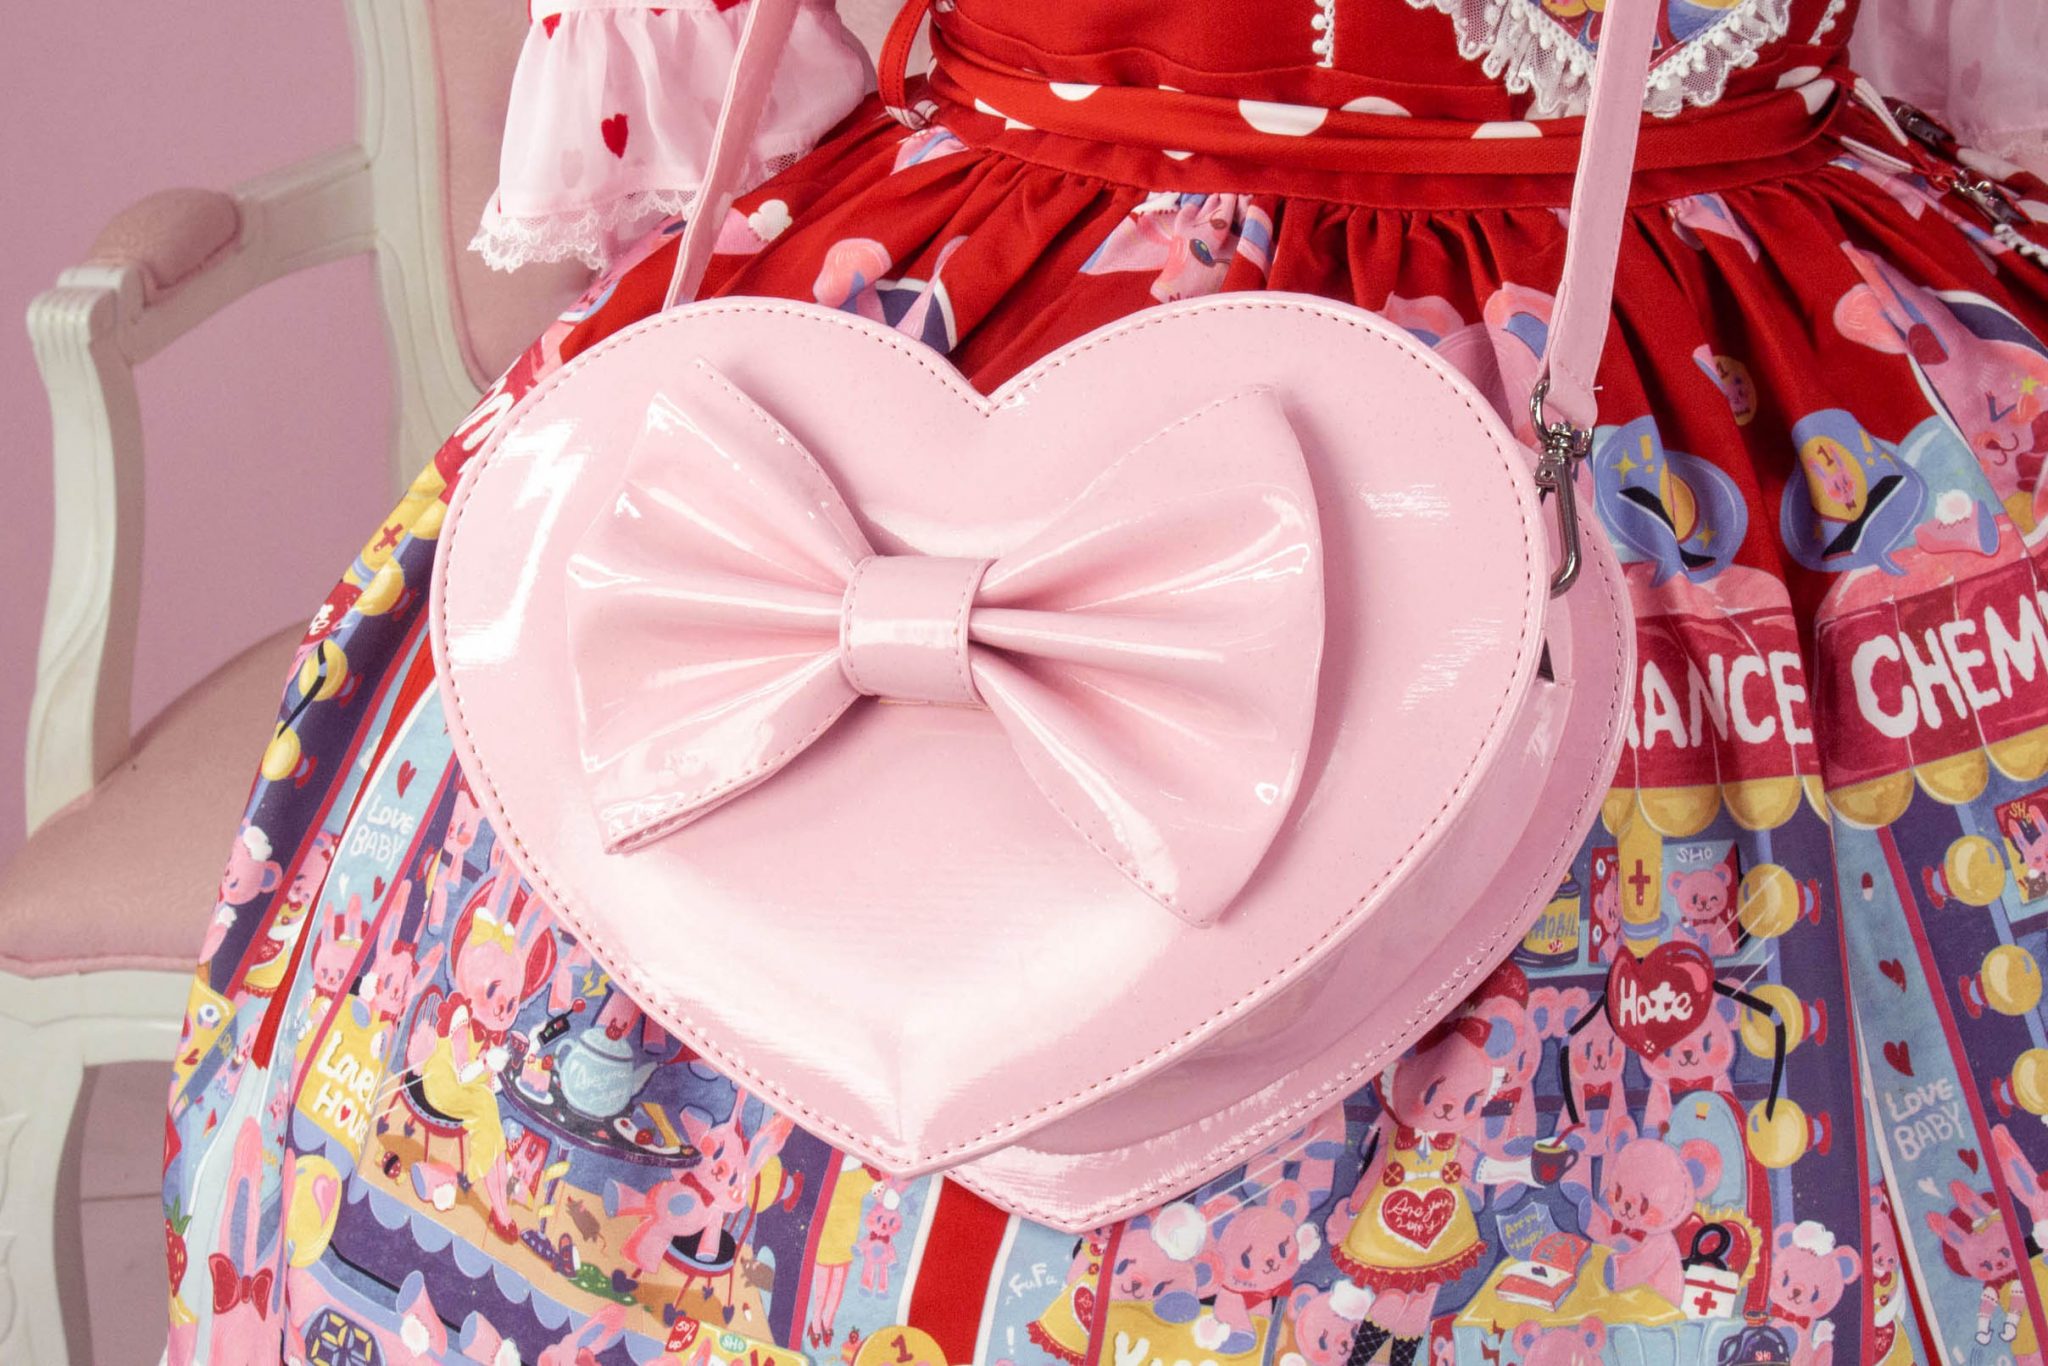 Pink Heart Game Day Bag